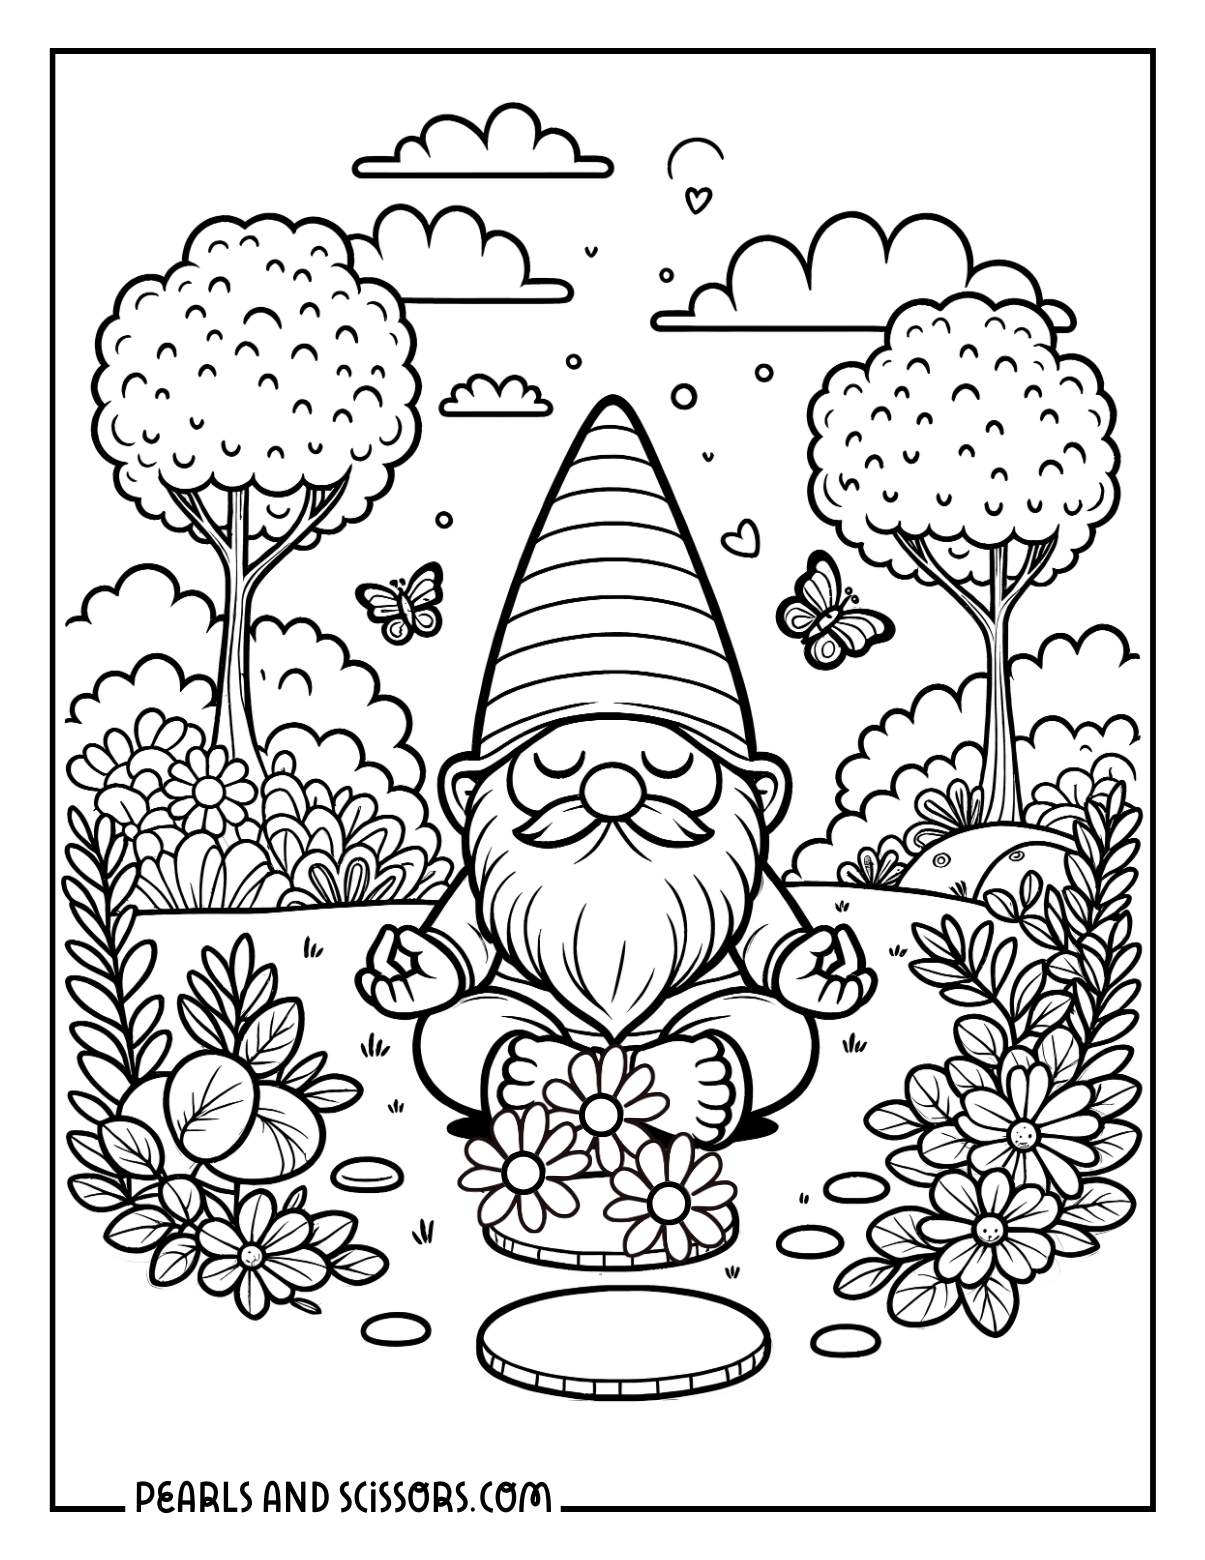 Garden gnome meditating christmas coloring pages.